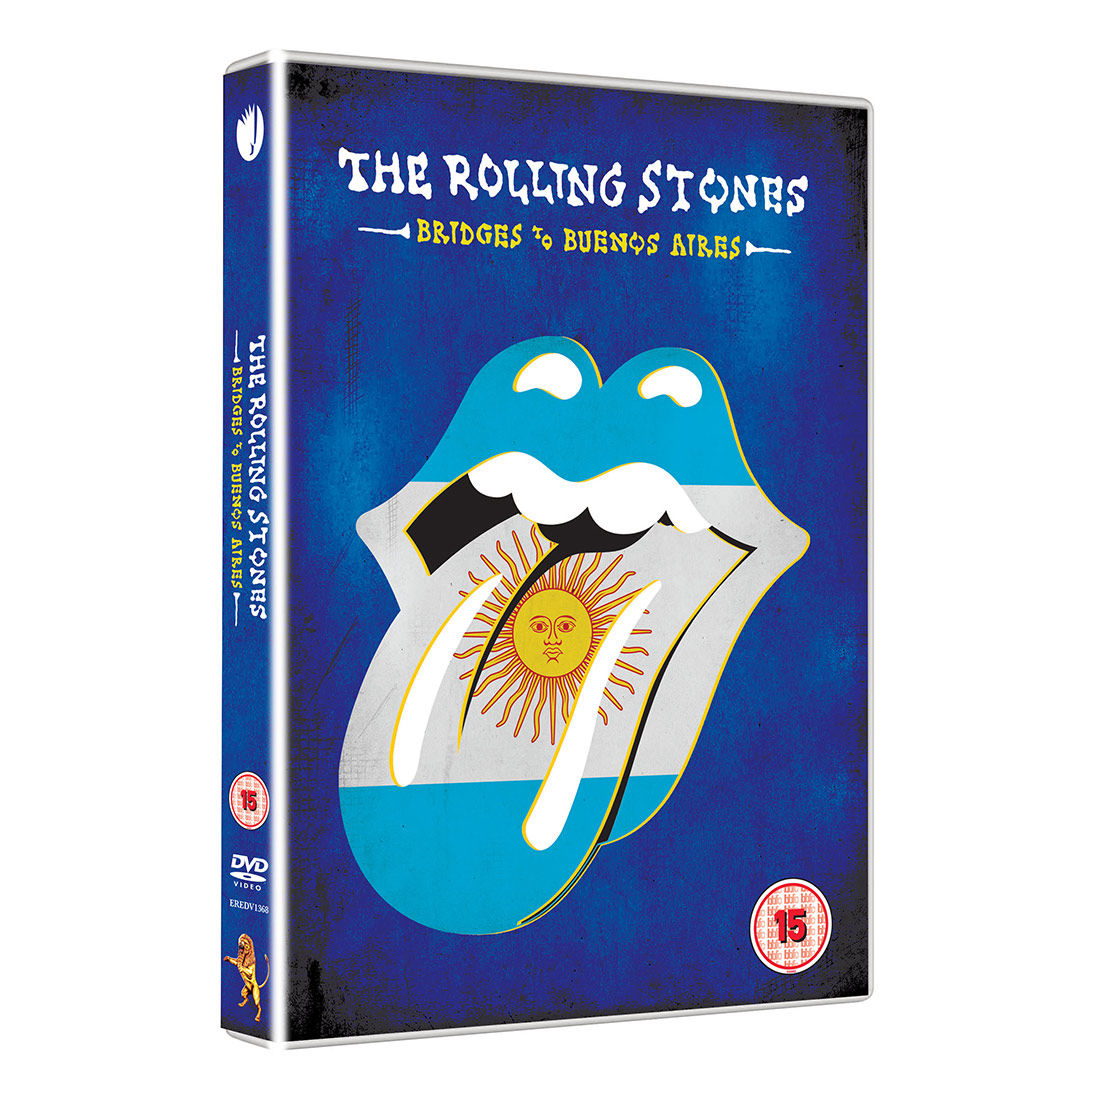 The Rolling Stones - Bridges To Buenos Aires DVD